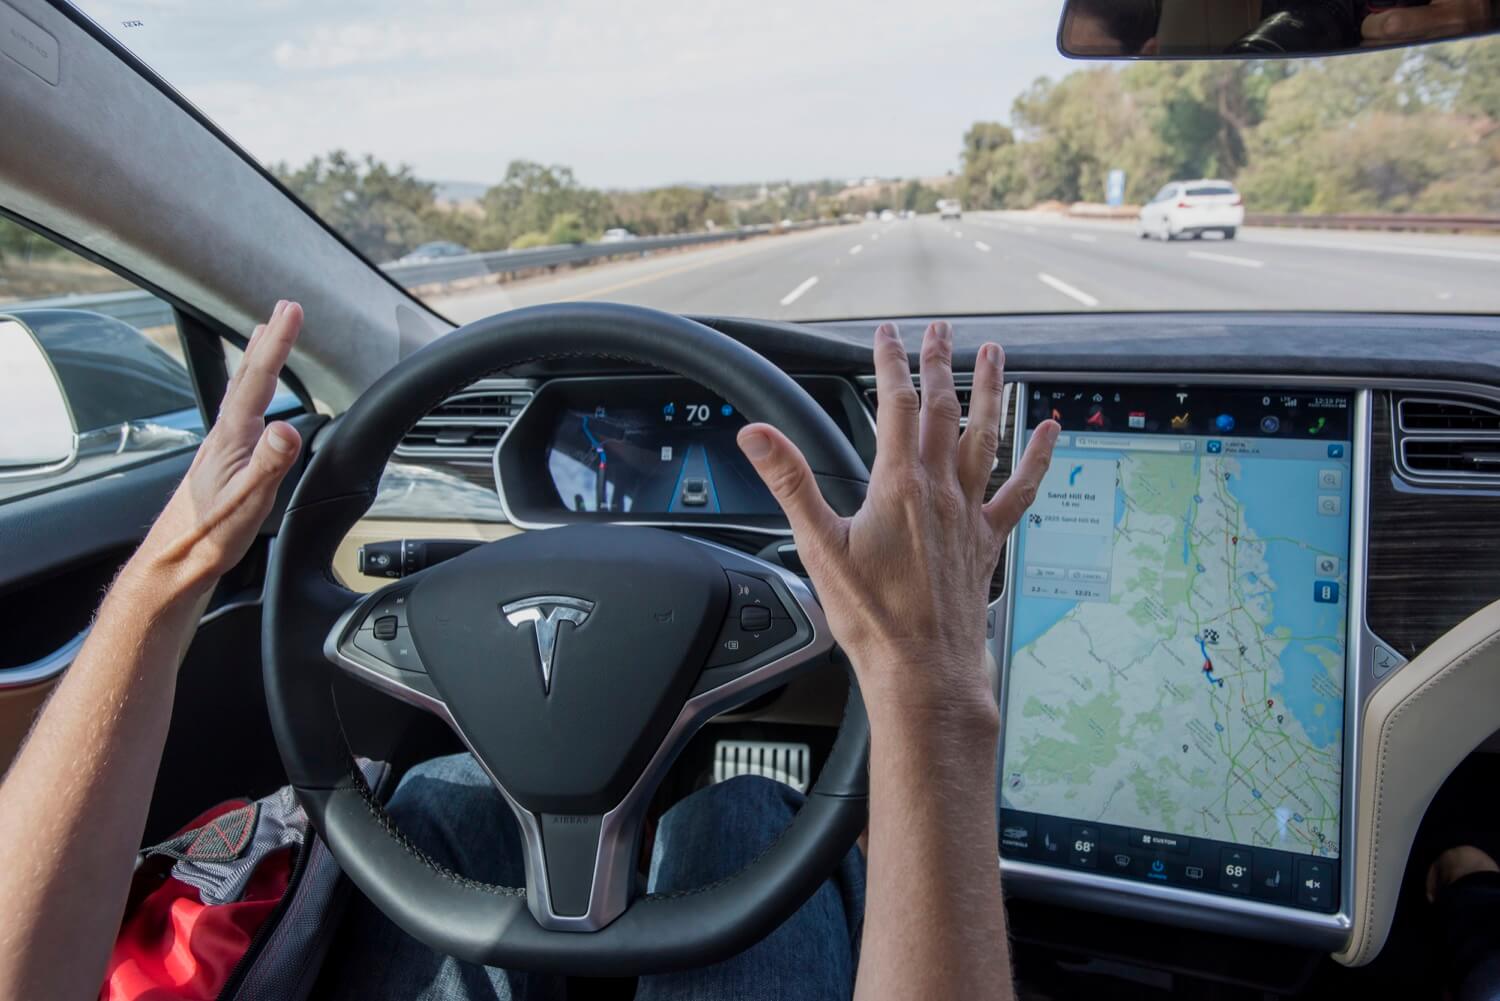 New details of the recent accident Tesla Model S: autopilot worked, the driver was looking at smartphone